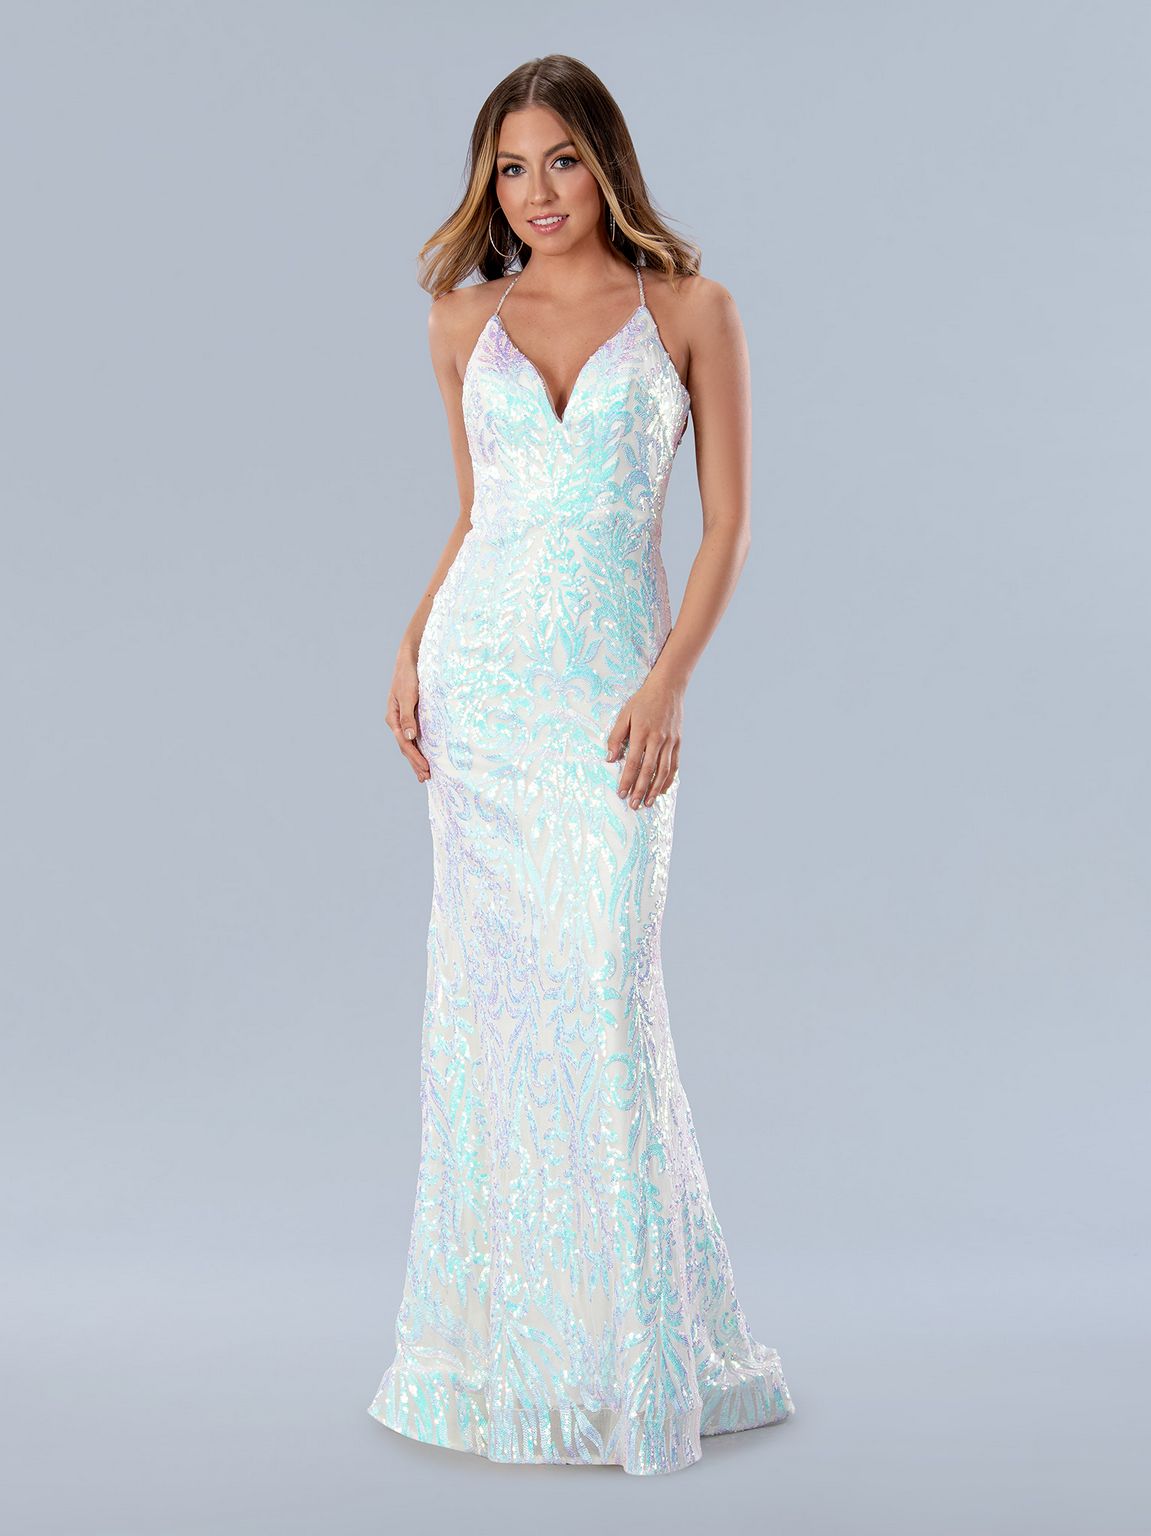 Prom Dresses Long Formal Iridescent Sequin Prom Dress Off White